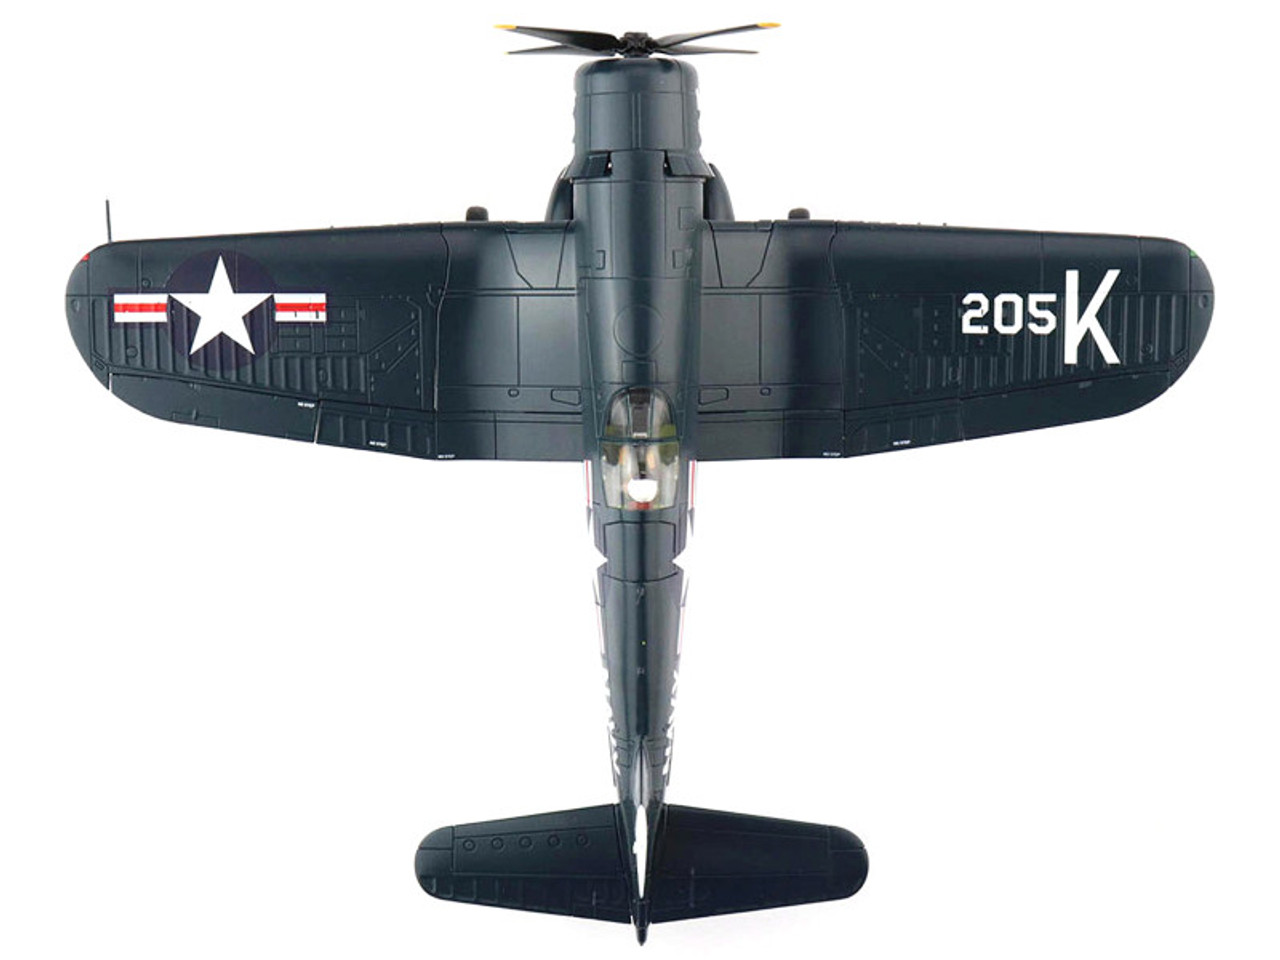 Vought F4U-4 Corsair "Medal of Honor" Fighter Aircraft White 205 "LTJG Thomas (Lou) Hudner VF-32 USS Leyte" (4th Dec 1950) "Air Power Series" 1/48 Diecast Model by Hobby Master